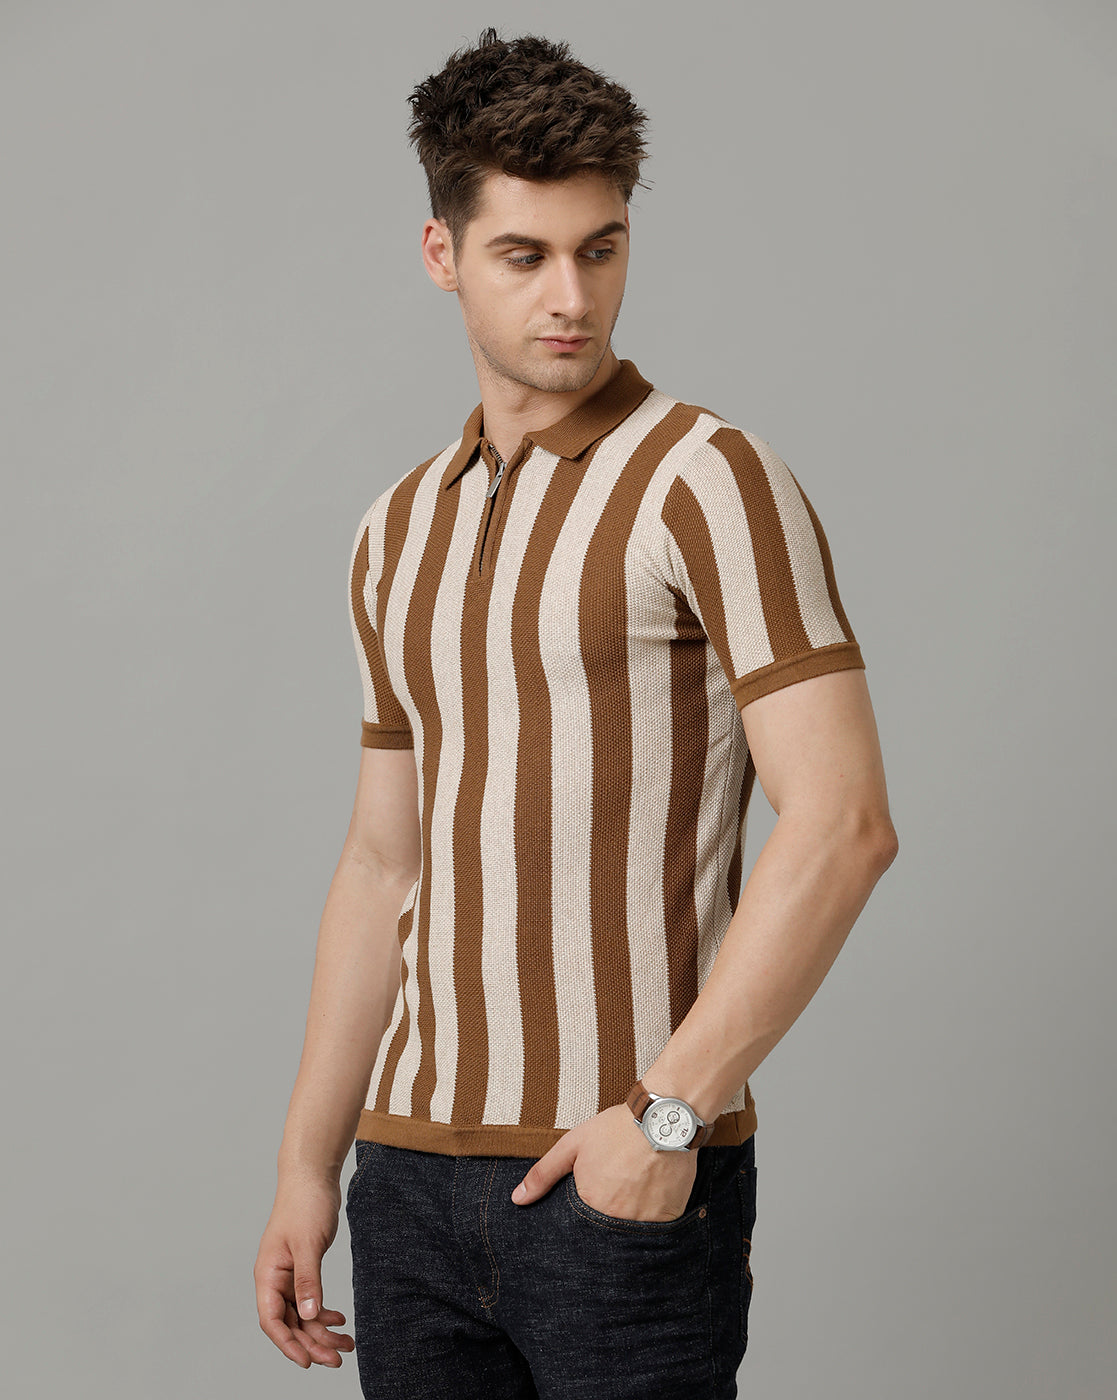 Identiti Brown Half Sleeve Striped Slim Fit Cotton Casual Polo T-Shirt For Men.